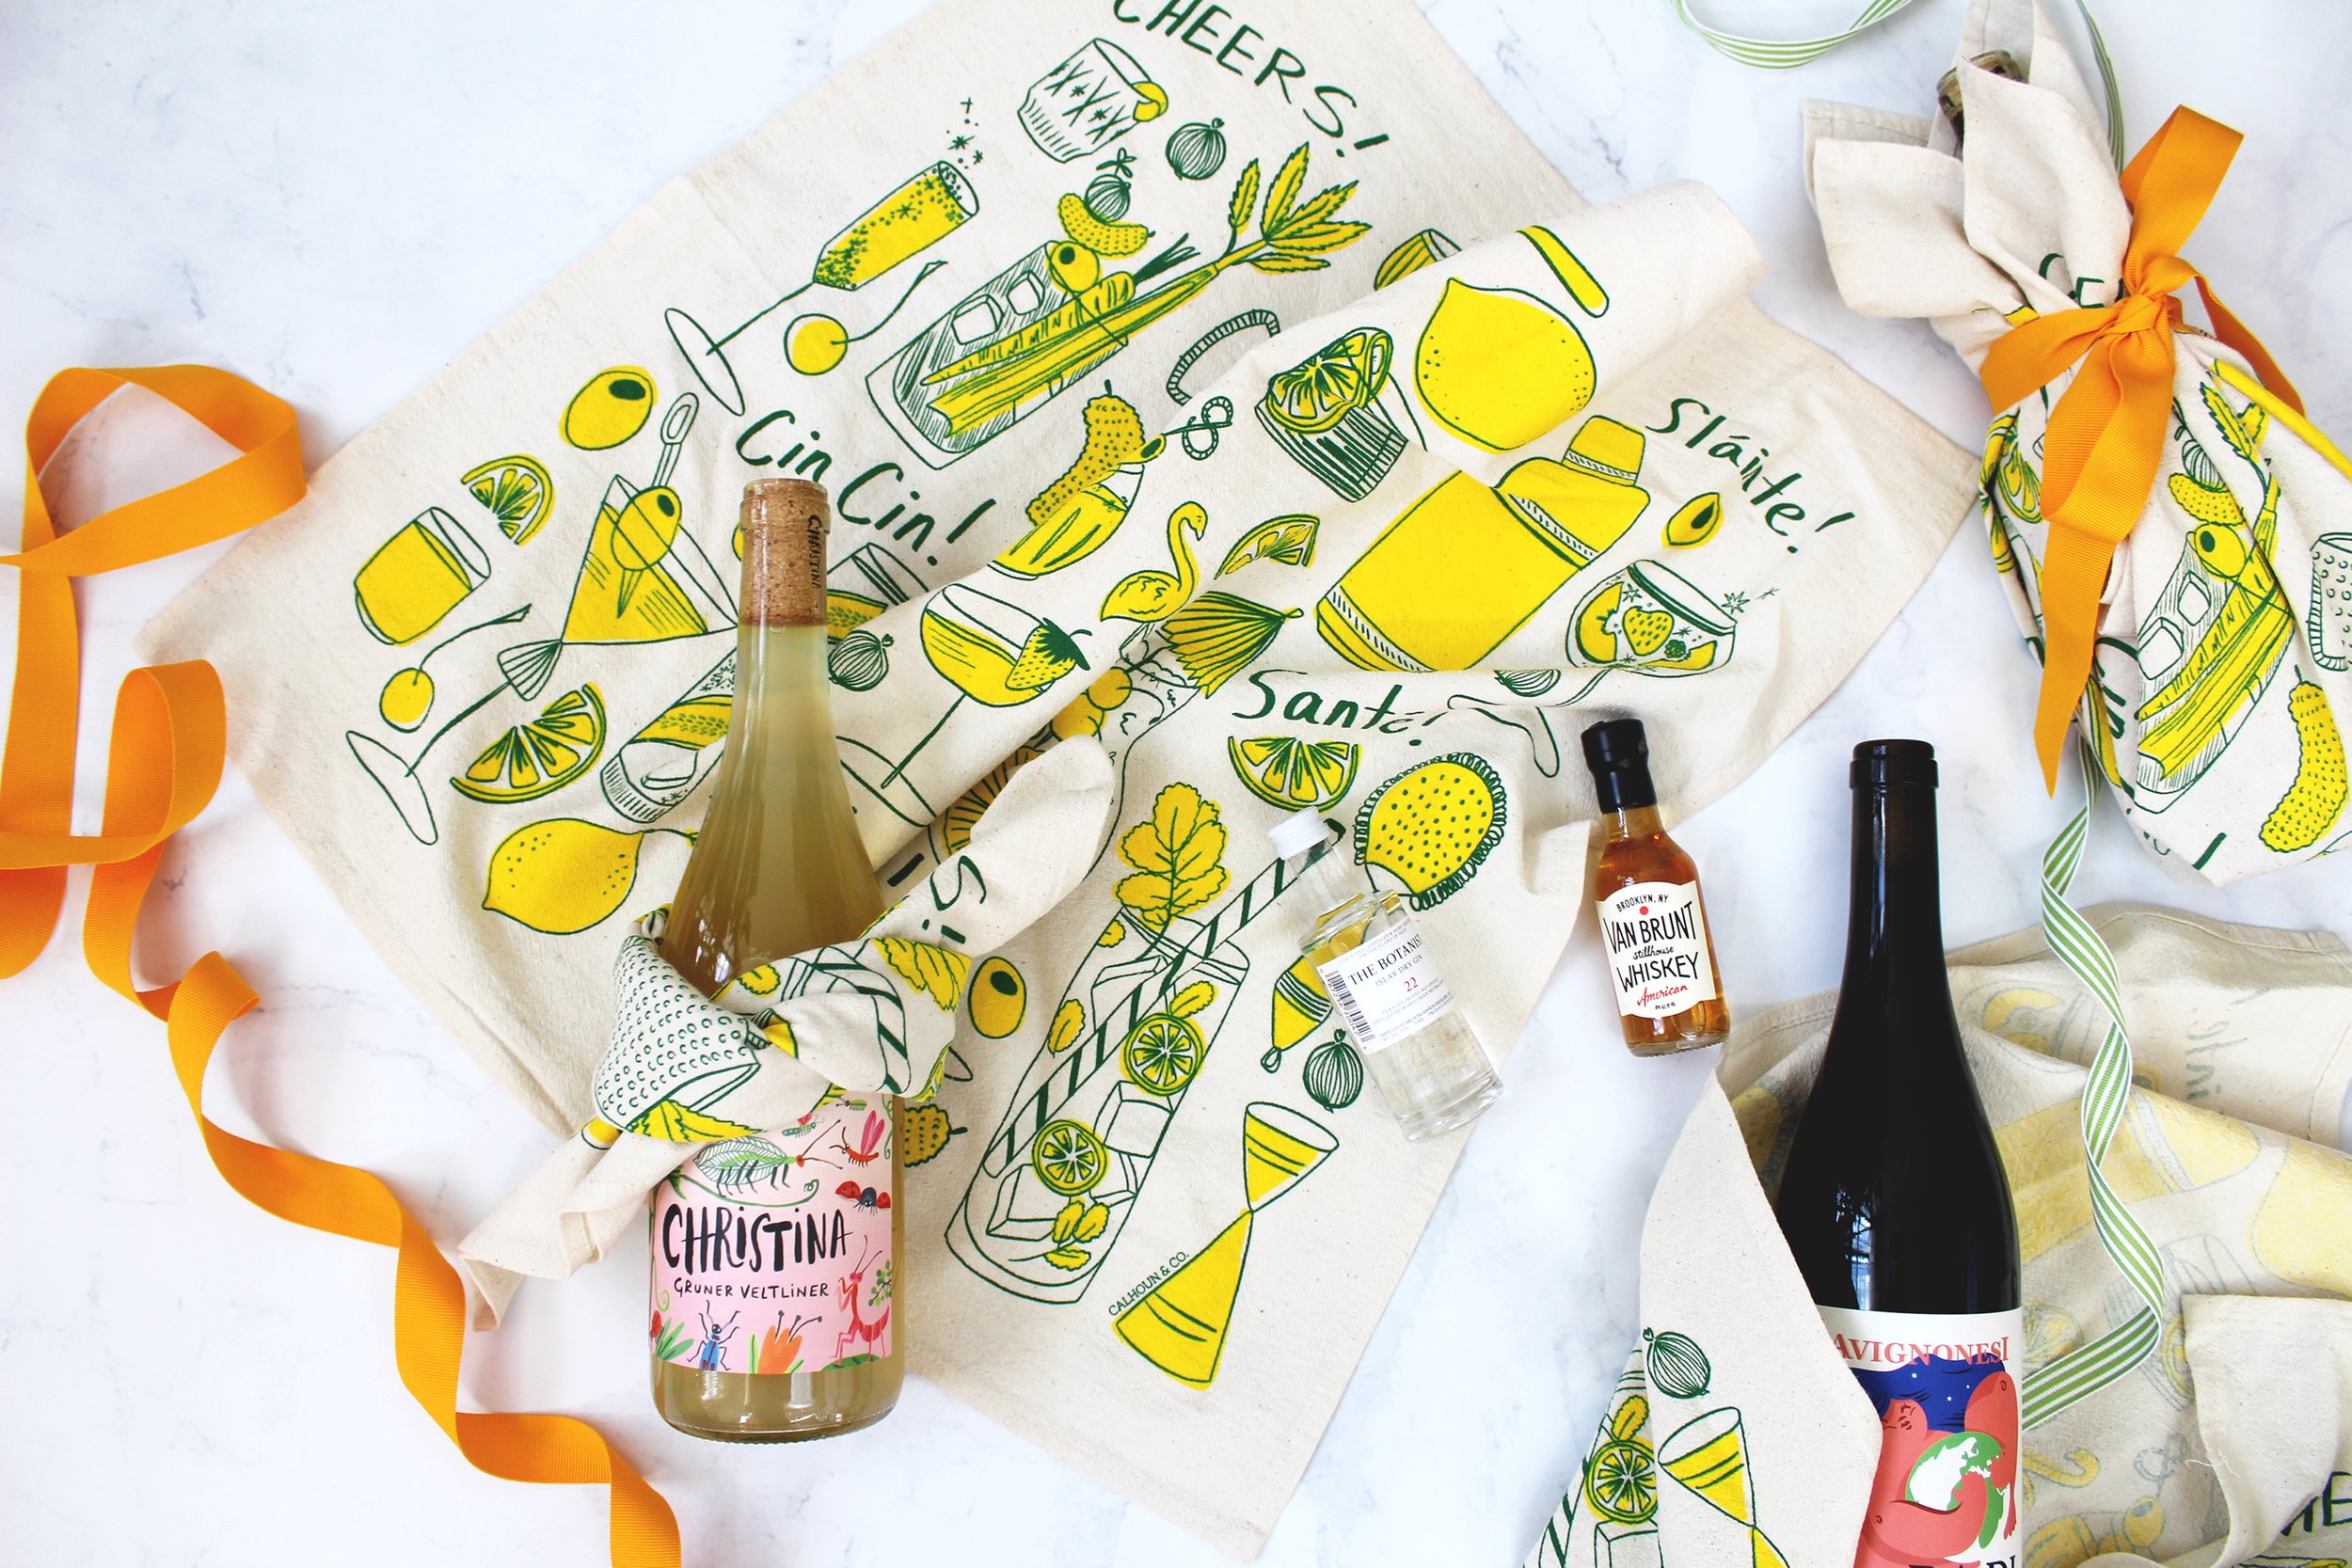 Reusable Gift Wrap - Printed Cocktails Cheers tea Towels by Calhoun &amp; Co. - Gifts for Host